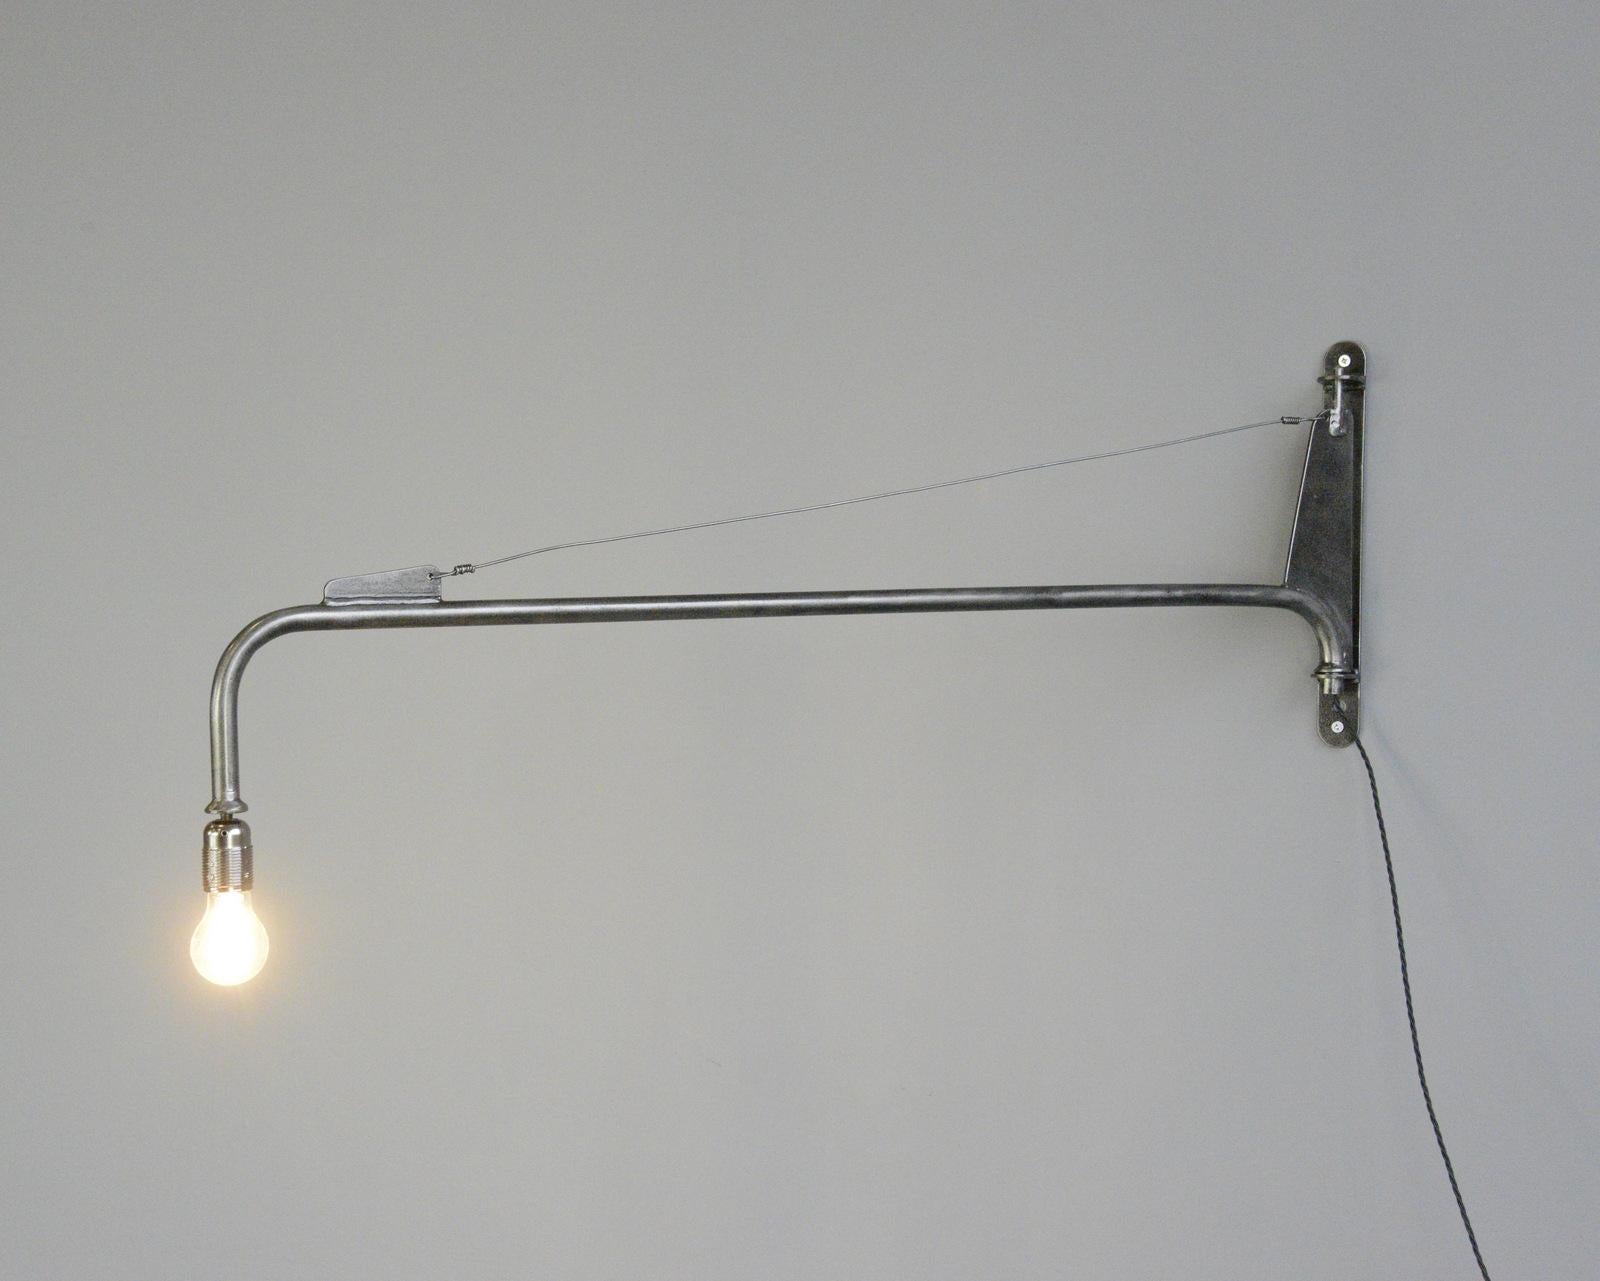 Jean Prouve jib wall lights Circa 1940s

- Price is per light (2 available)
- Takes E27 fitting bulbs
- On a remote control switch
- Swing out design based on a ships sail or jib
- Designed by Jean Prouve
- French ~ 1940s
- Measures: 6cm wide x 40cm